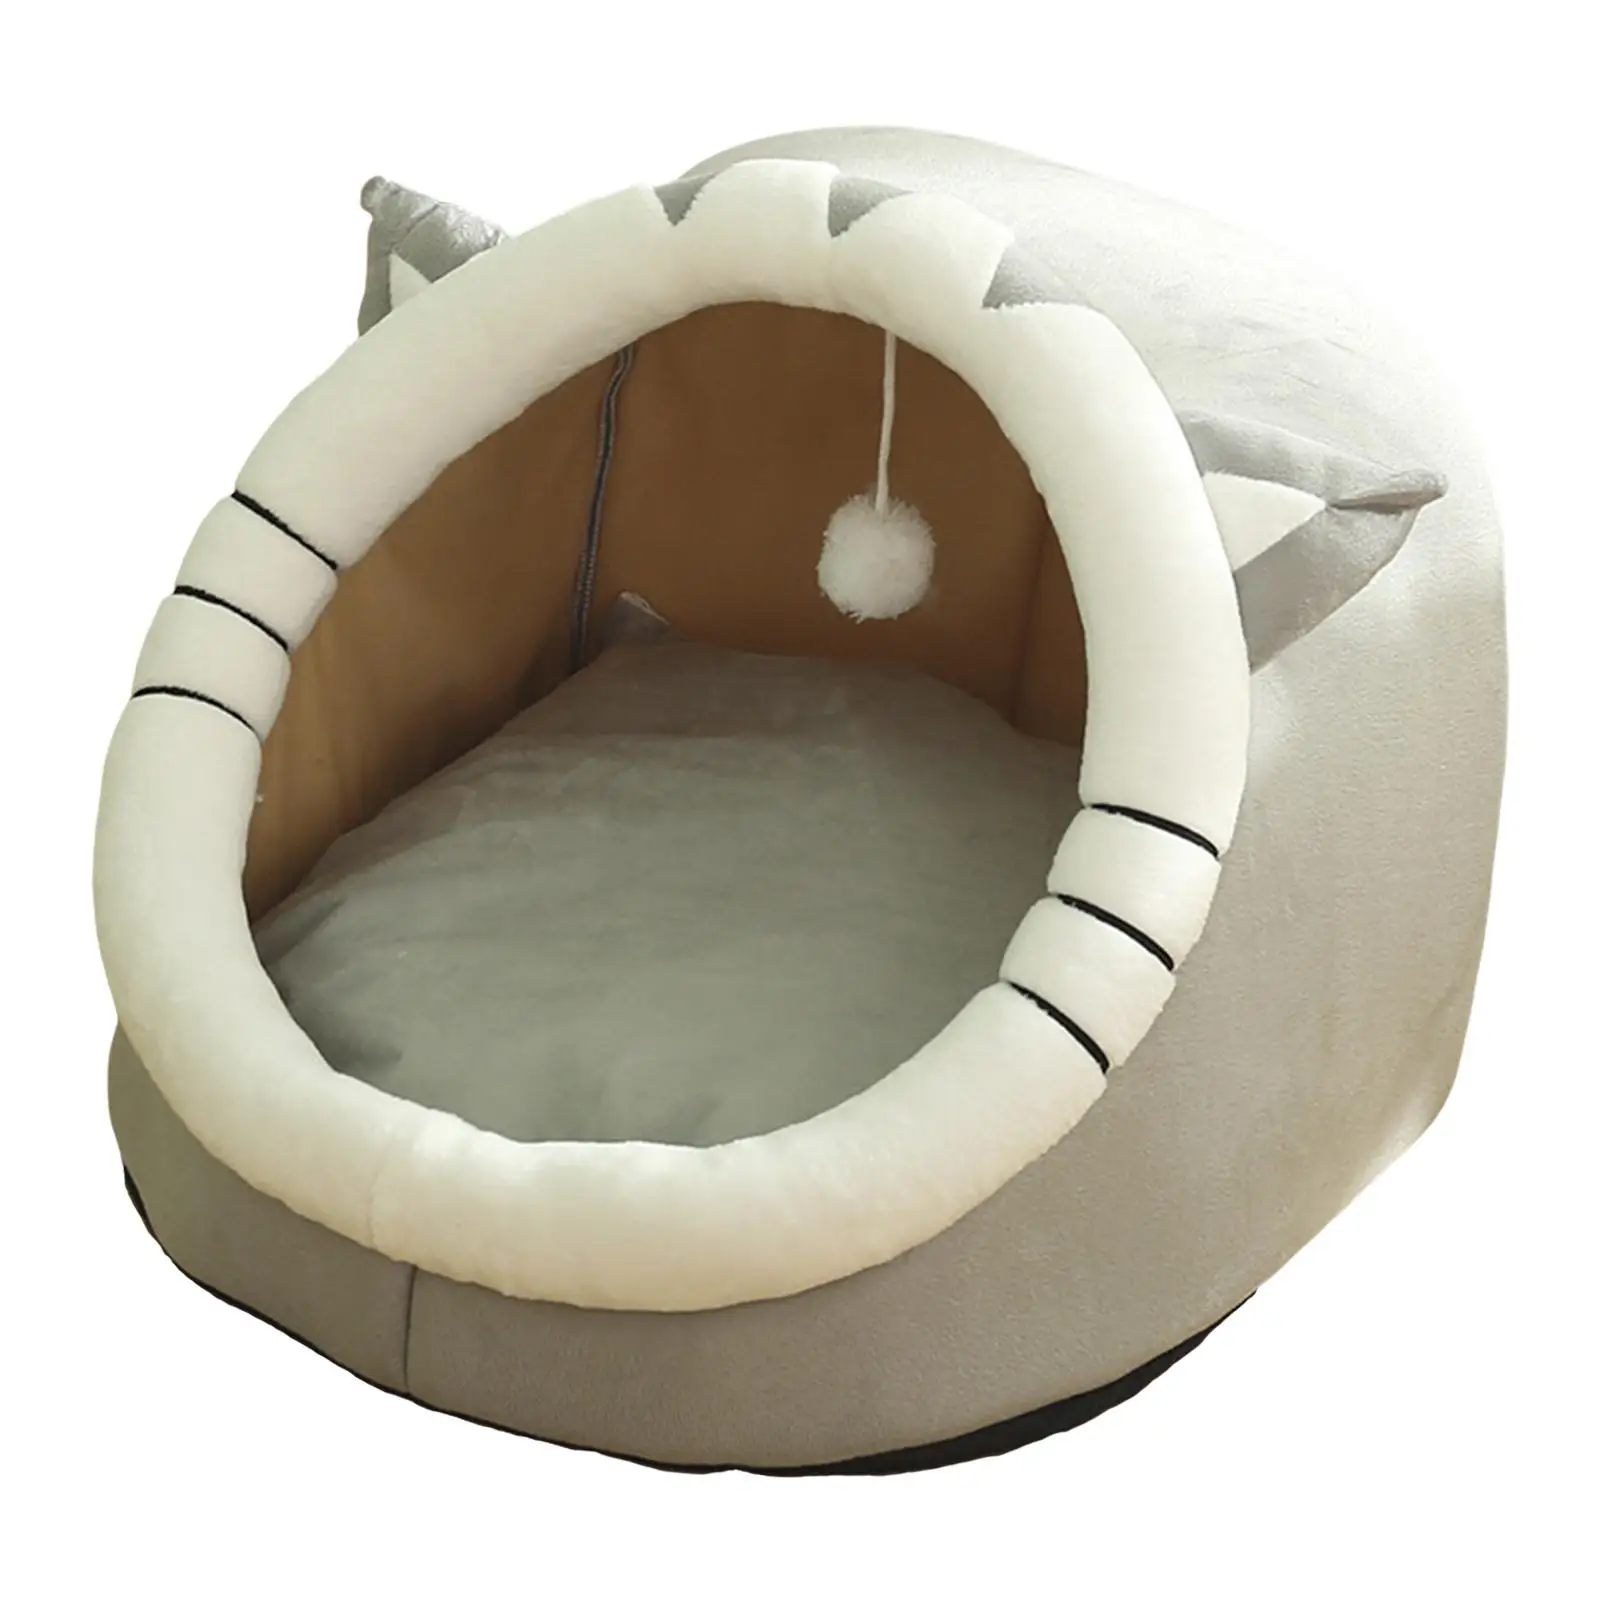 Washable Cave Bed Anti Slip Dog with Ball Toy Basket Furniture Sleeping Bed for Kitten